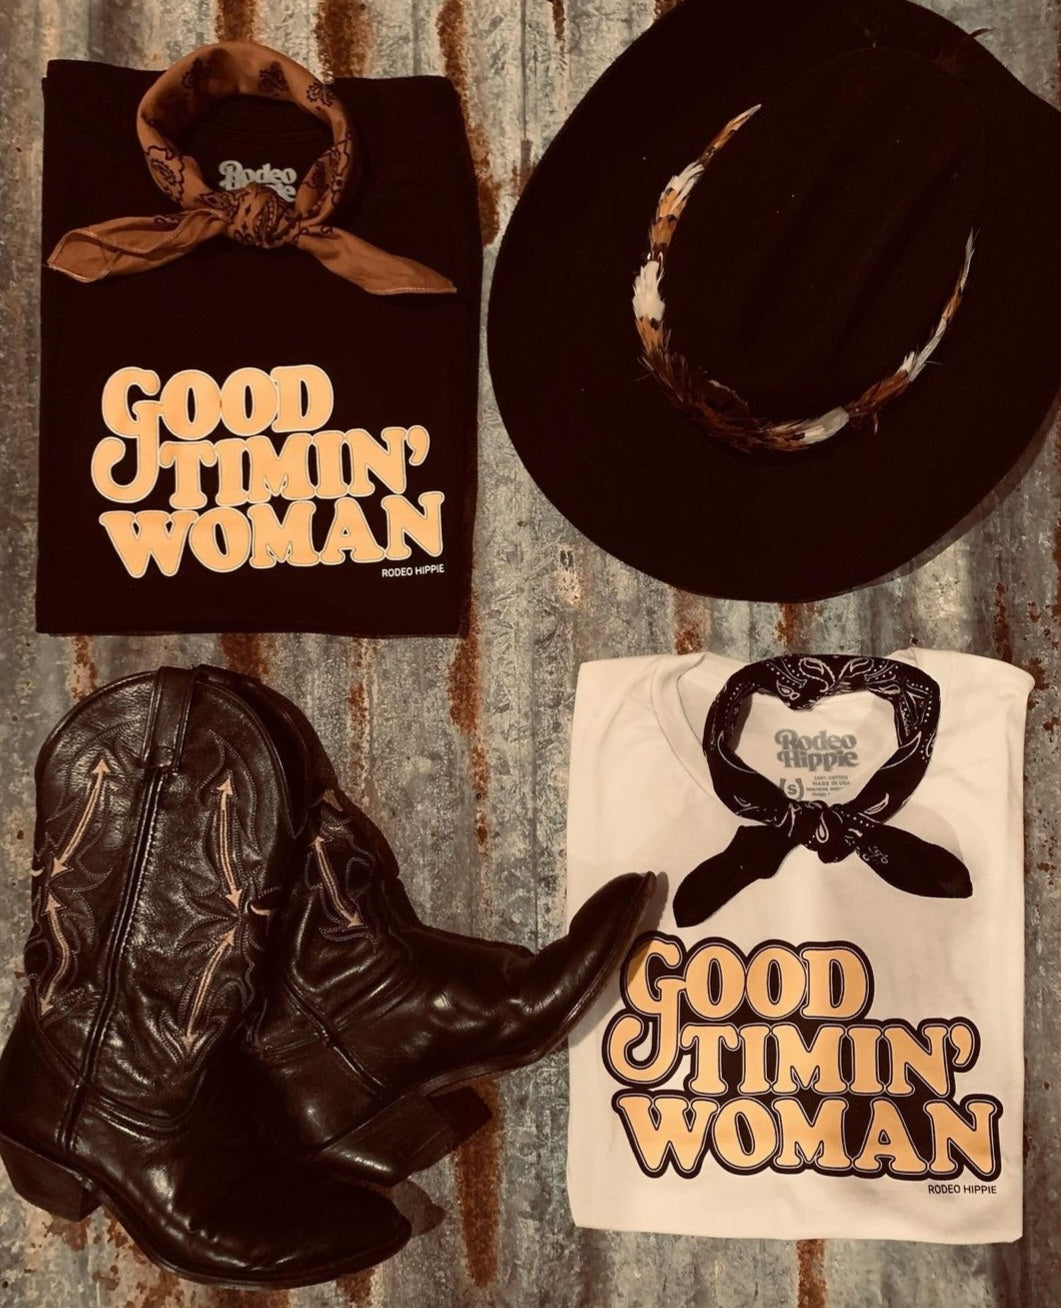 Good Timin Woman PRE ORDER! - beer, beer drinkin, cowboy, cowboys, cowgirl, drinkin, good, graohic, graohictee, graphic, graphic t, graphic tee, graphic tees, graphic top, graphict, hell, hippie, raise, rodeo, shirt, t, te, tee, tees, timin, timing, western, woman - Shirts & Tops - Baha Ranch Western Wear